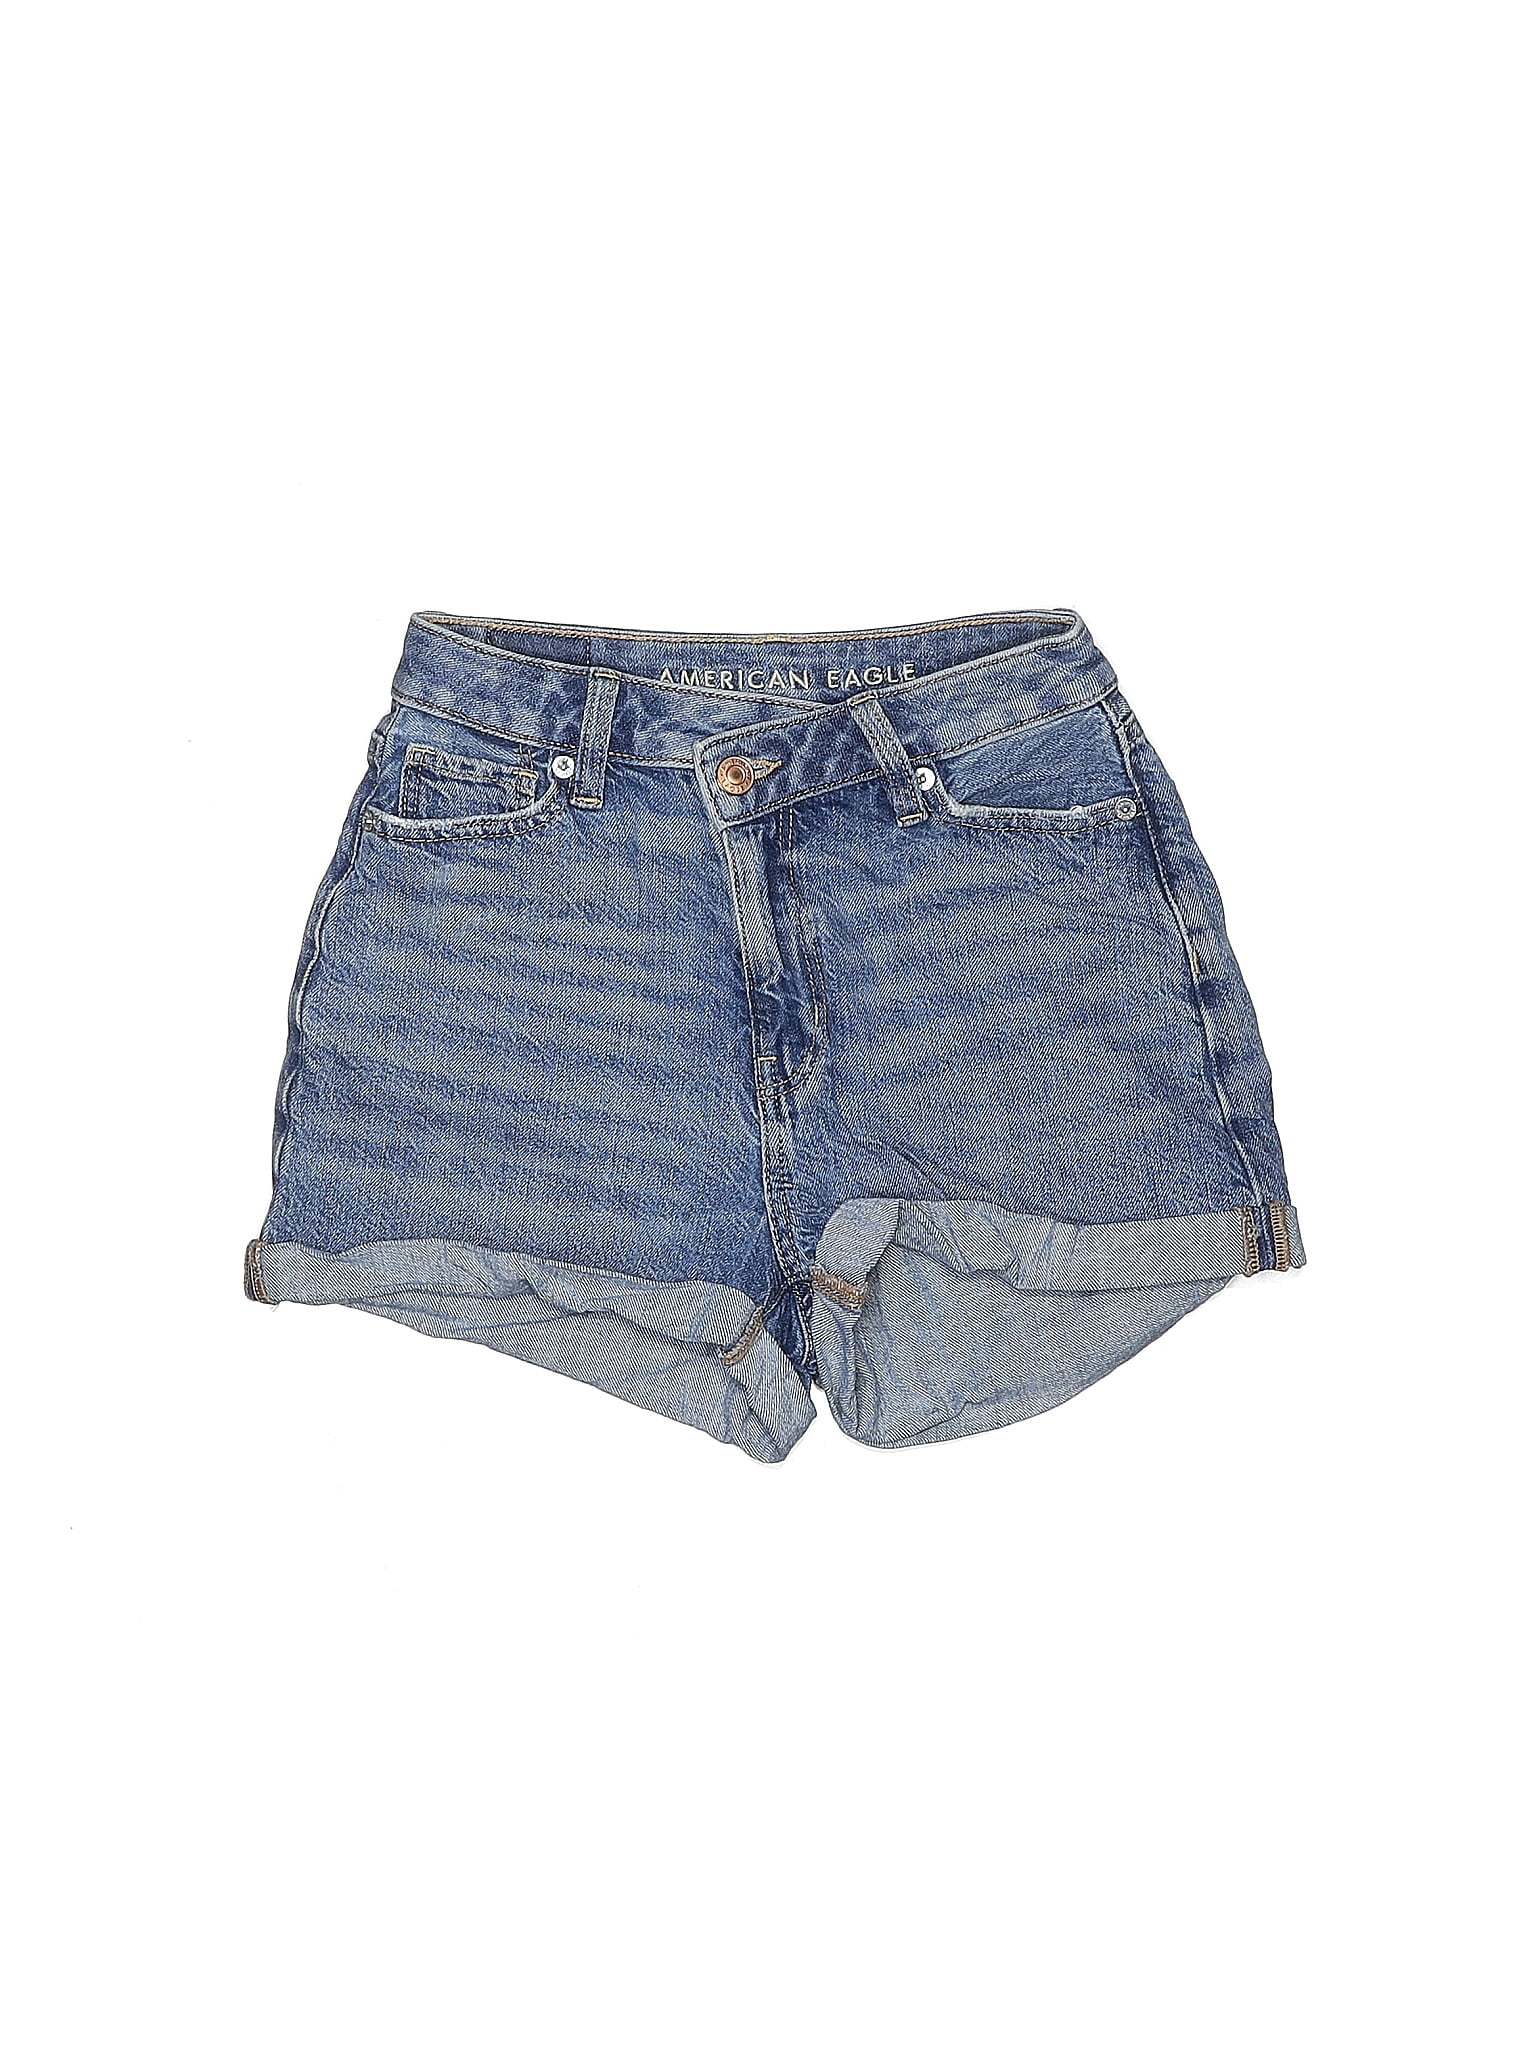 American Eagle Outfitters 100% Cotton Solid Blue Denim Shorts Size 000 -  66% off